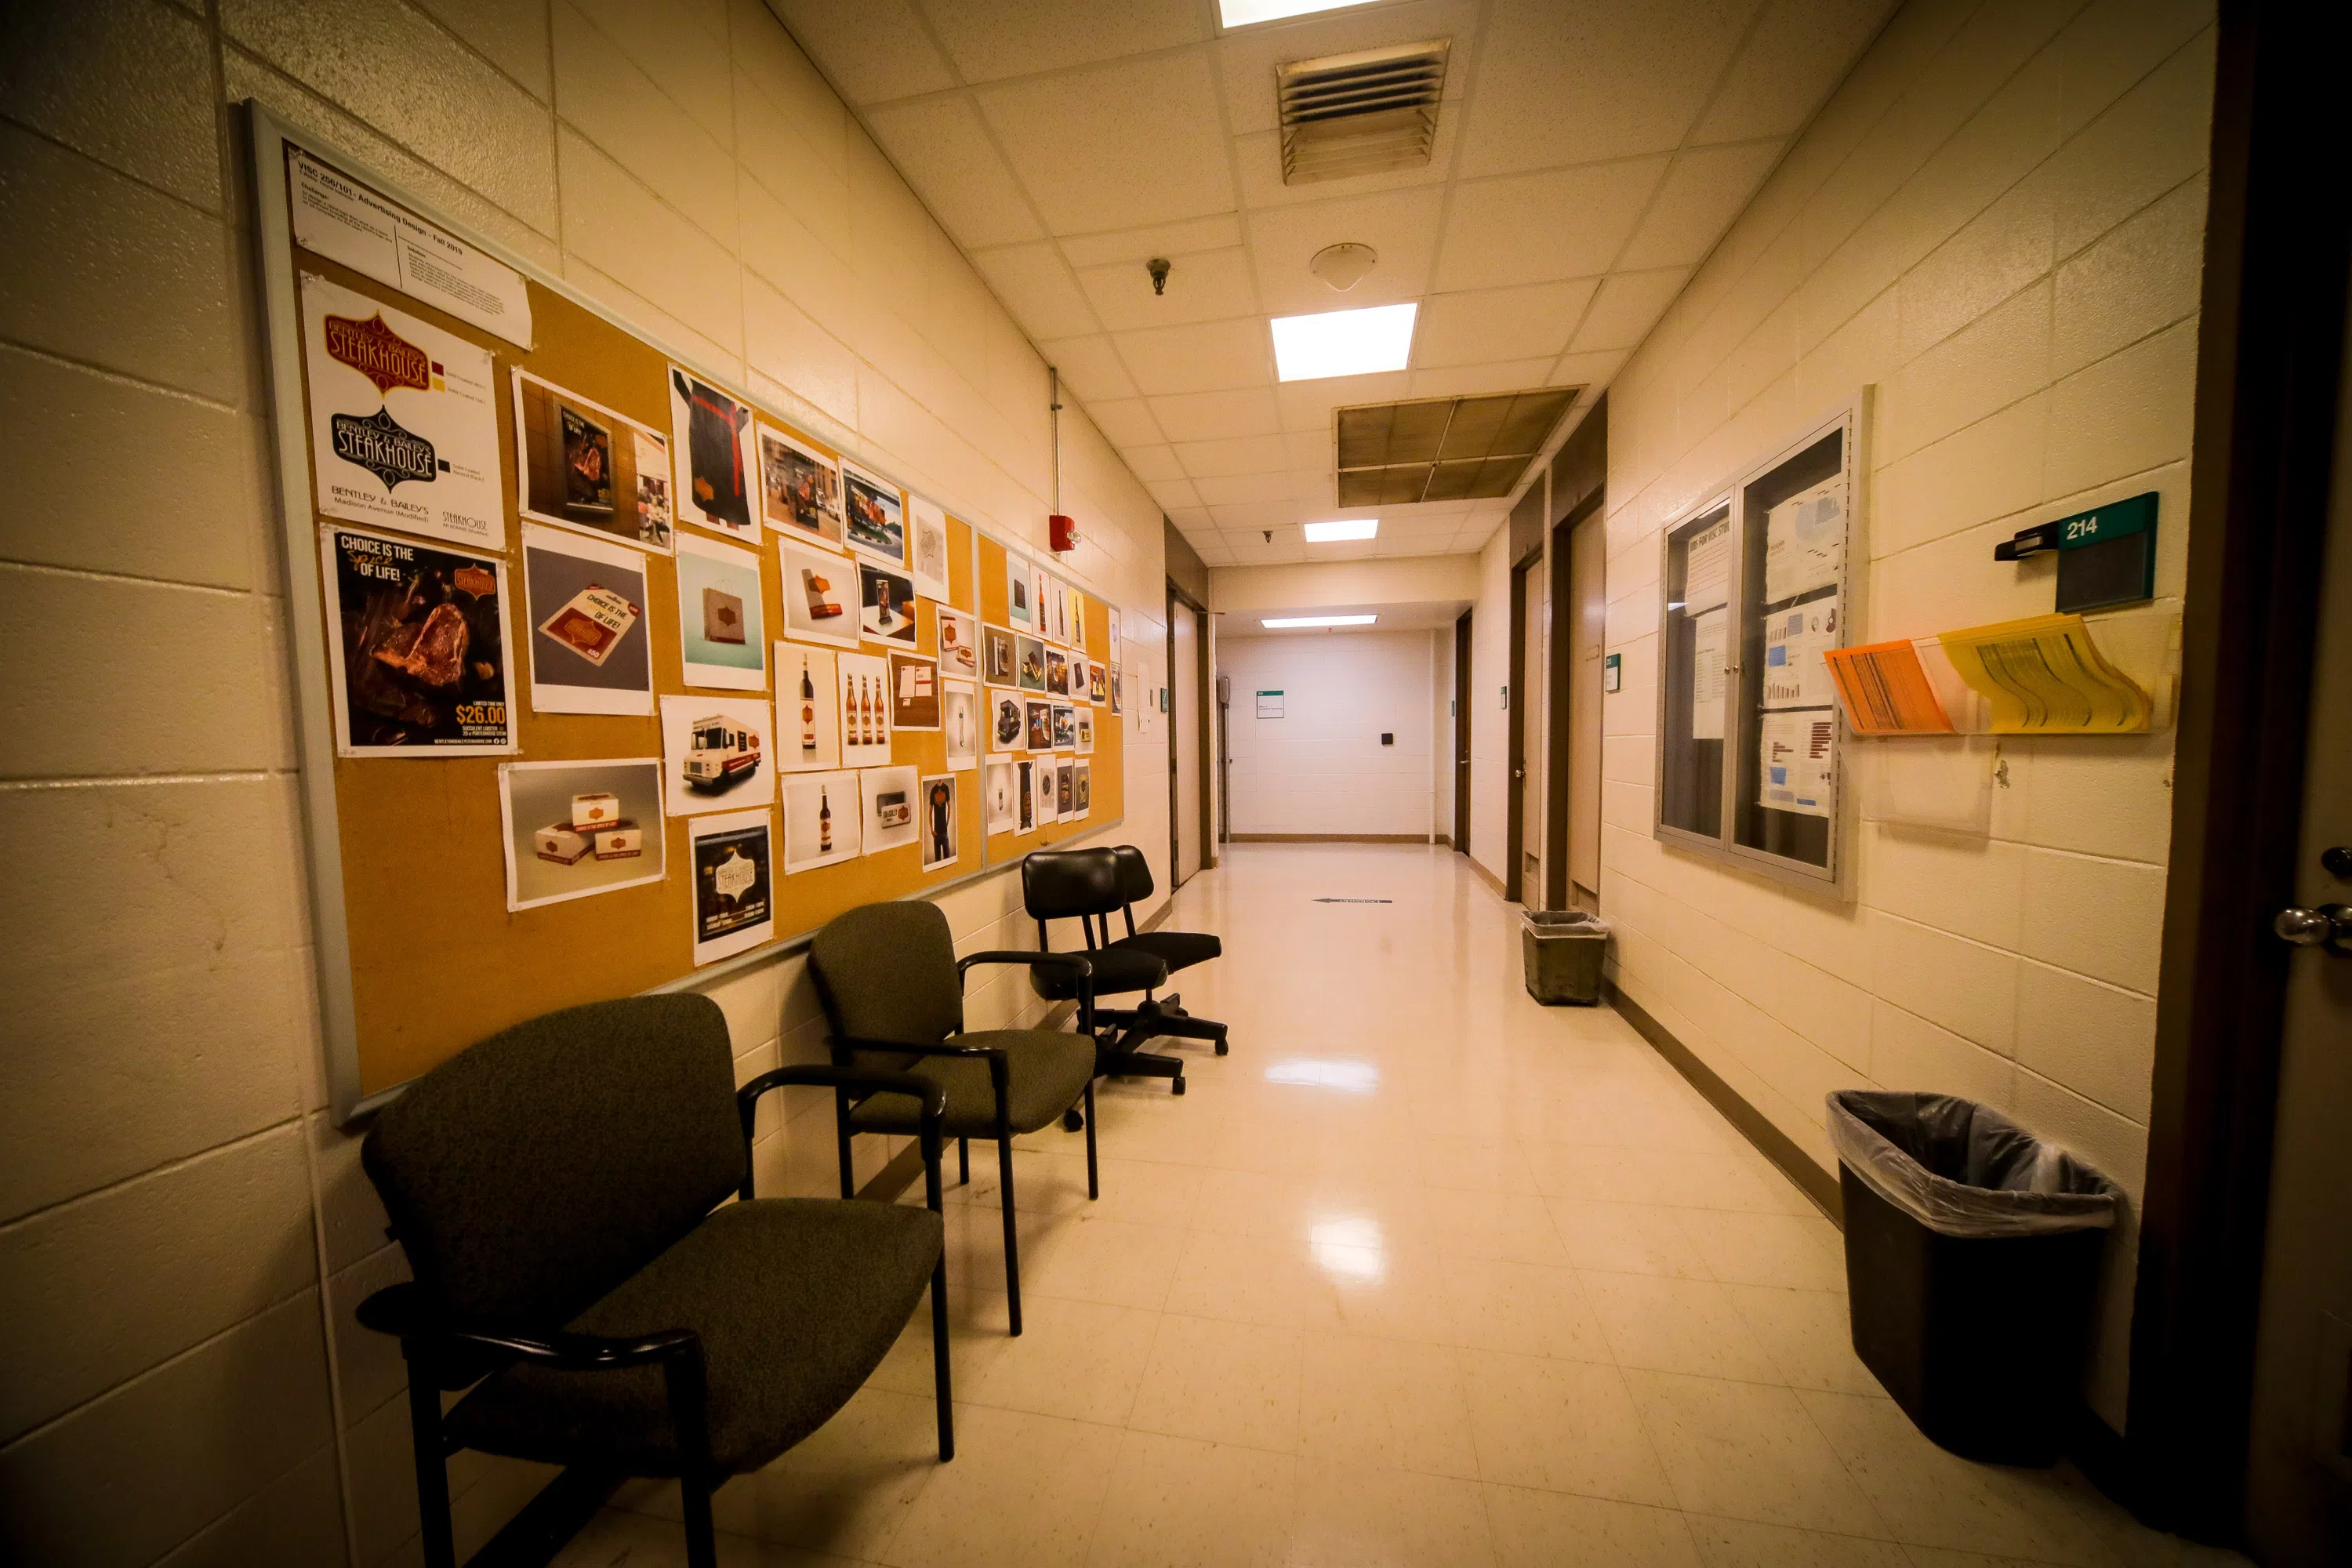 hallway with art work pinned to bulletin boards on the left side